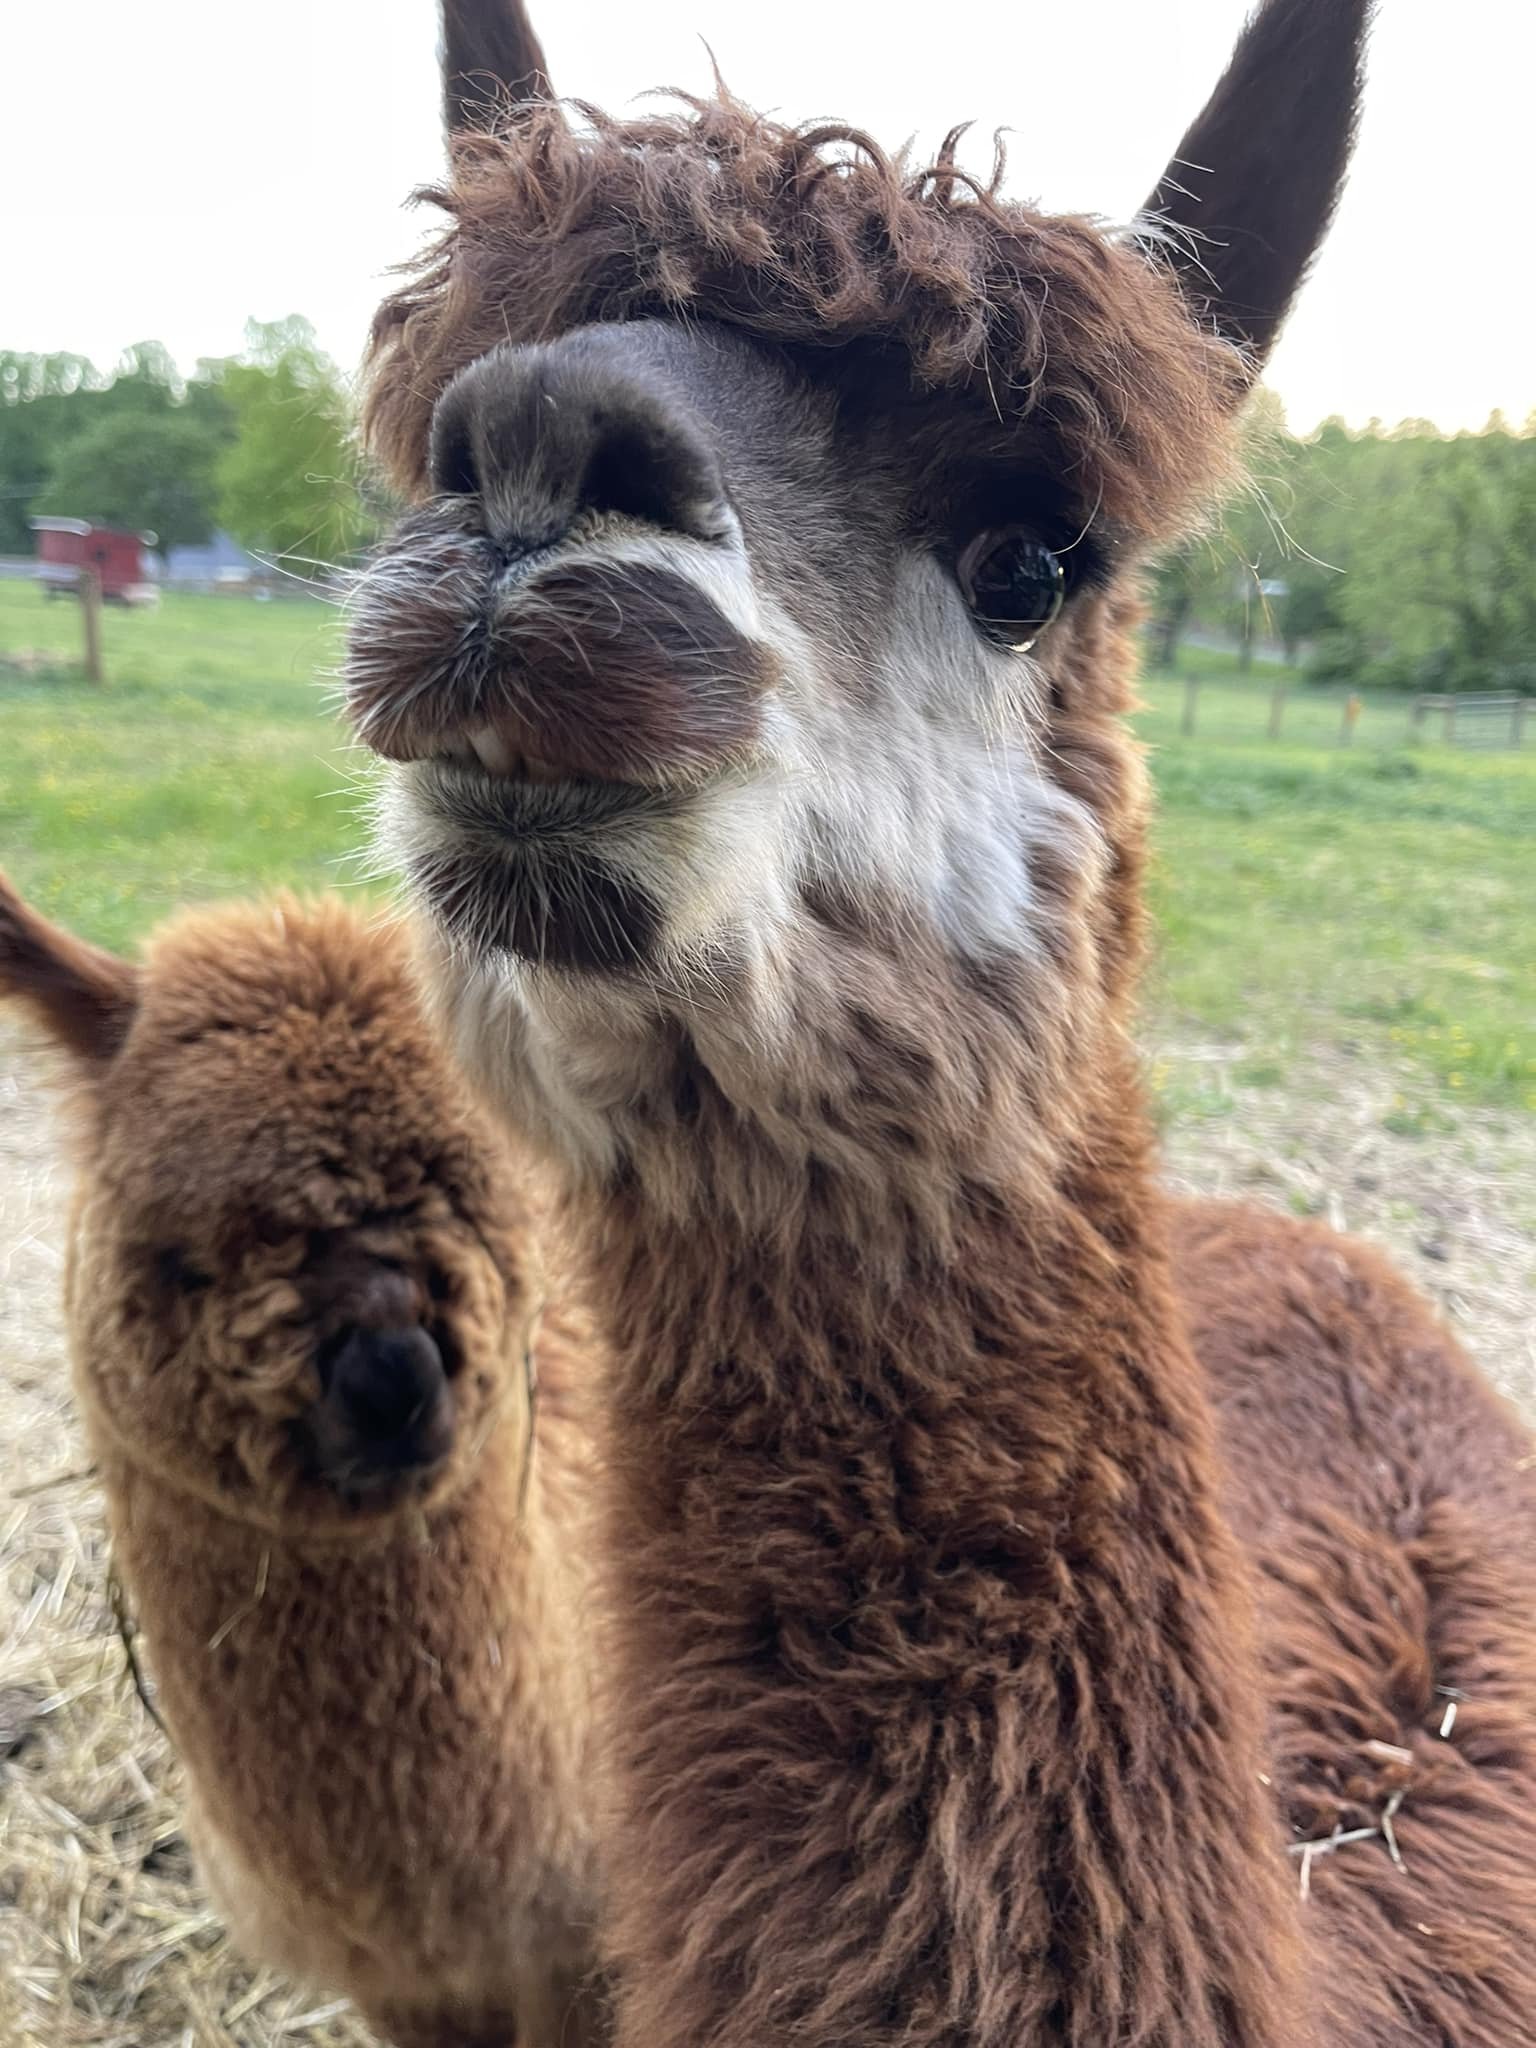 Make sure to watch our stories each day to see if Tia has her baby (Cria) 😮. This will be our first ever cria born on the farm #alpaca #alpacas #cria #baby #berkscountypa

Any guesses on gender / what color?